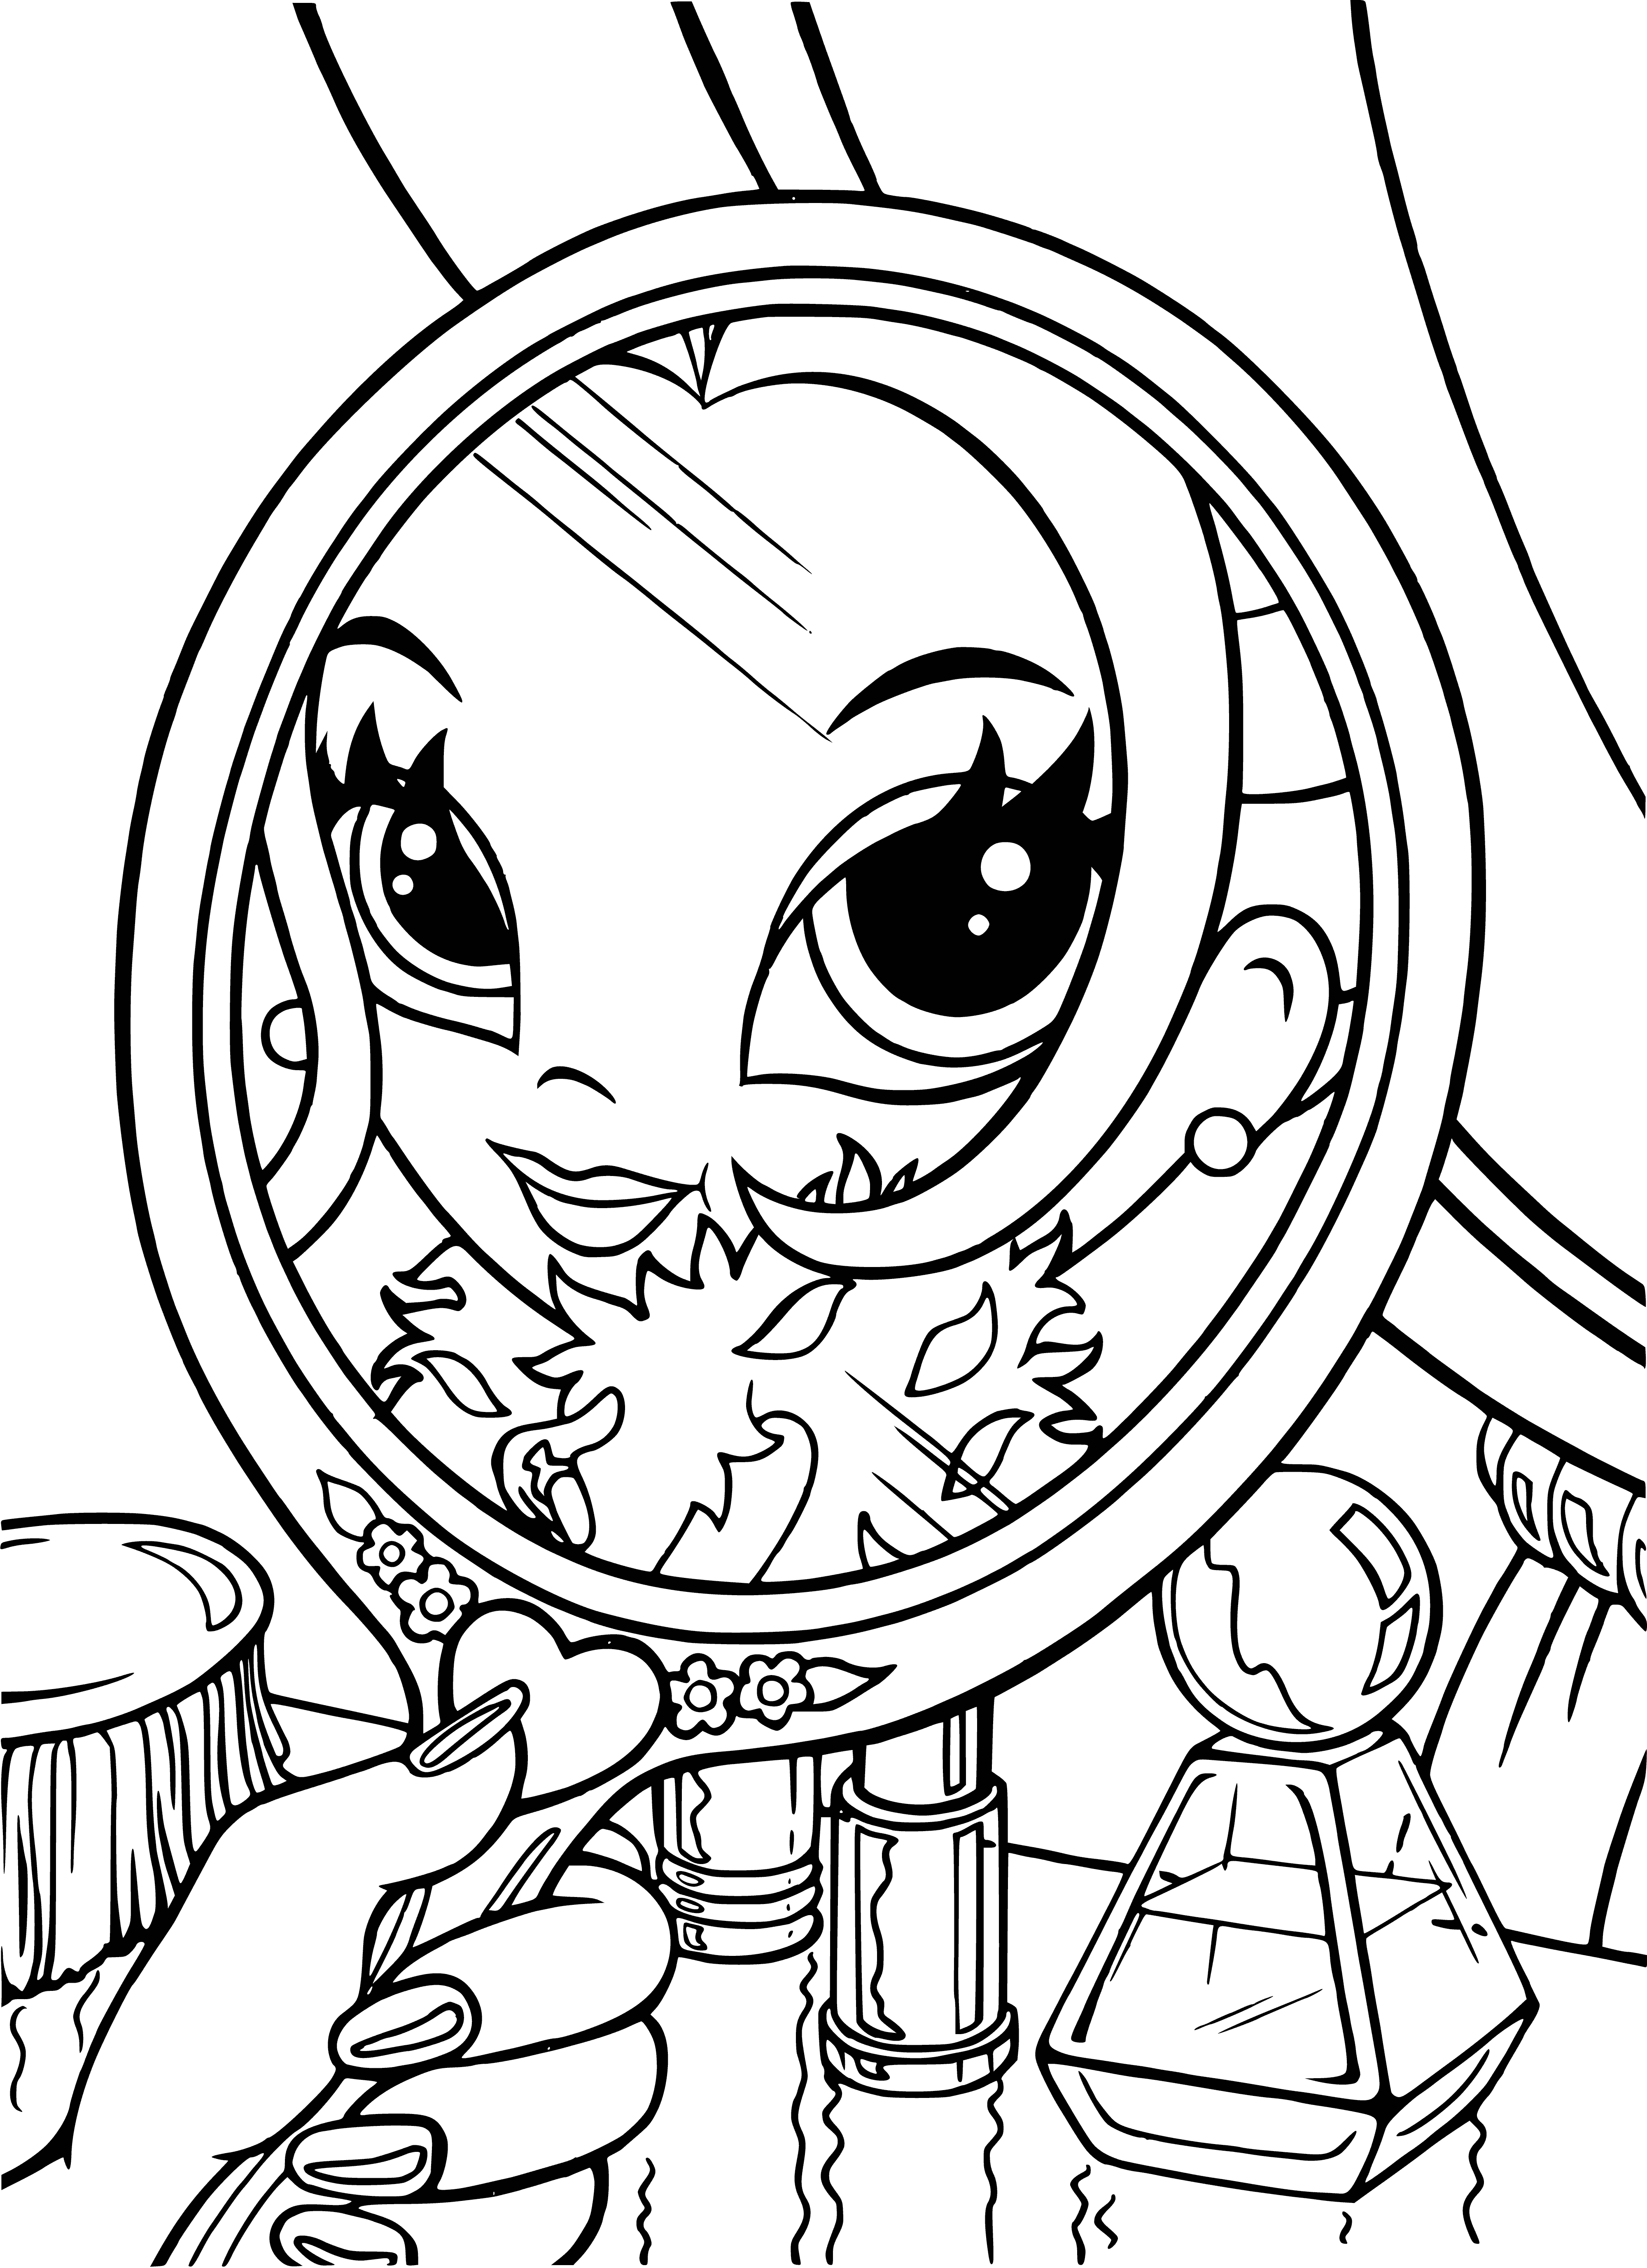 coloring page: Girl wearing pink stands confidently in front of mirror -smiling with reflection of her Lisa Frank coloring page. #glamour #selflove